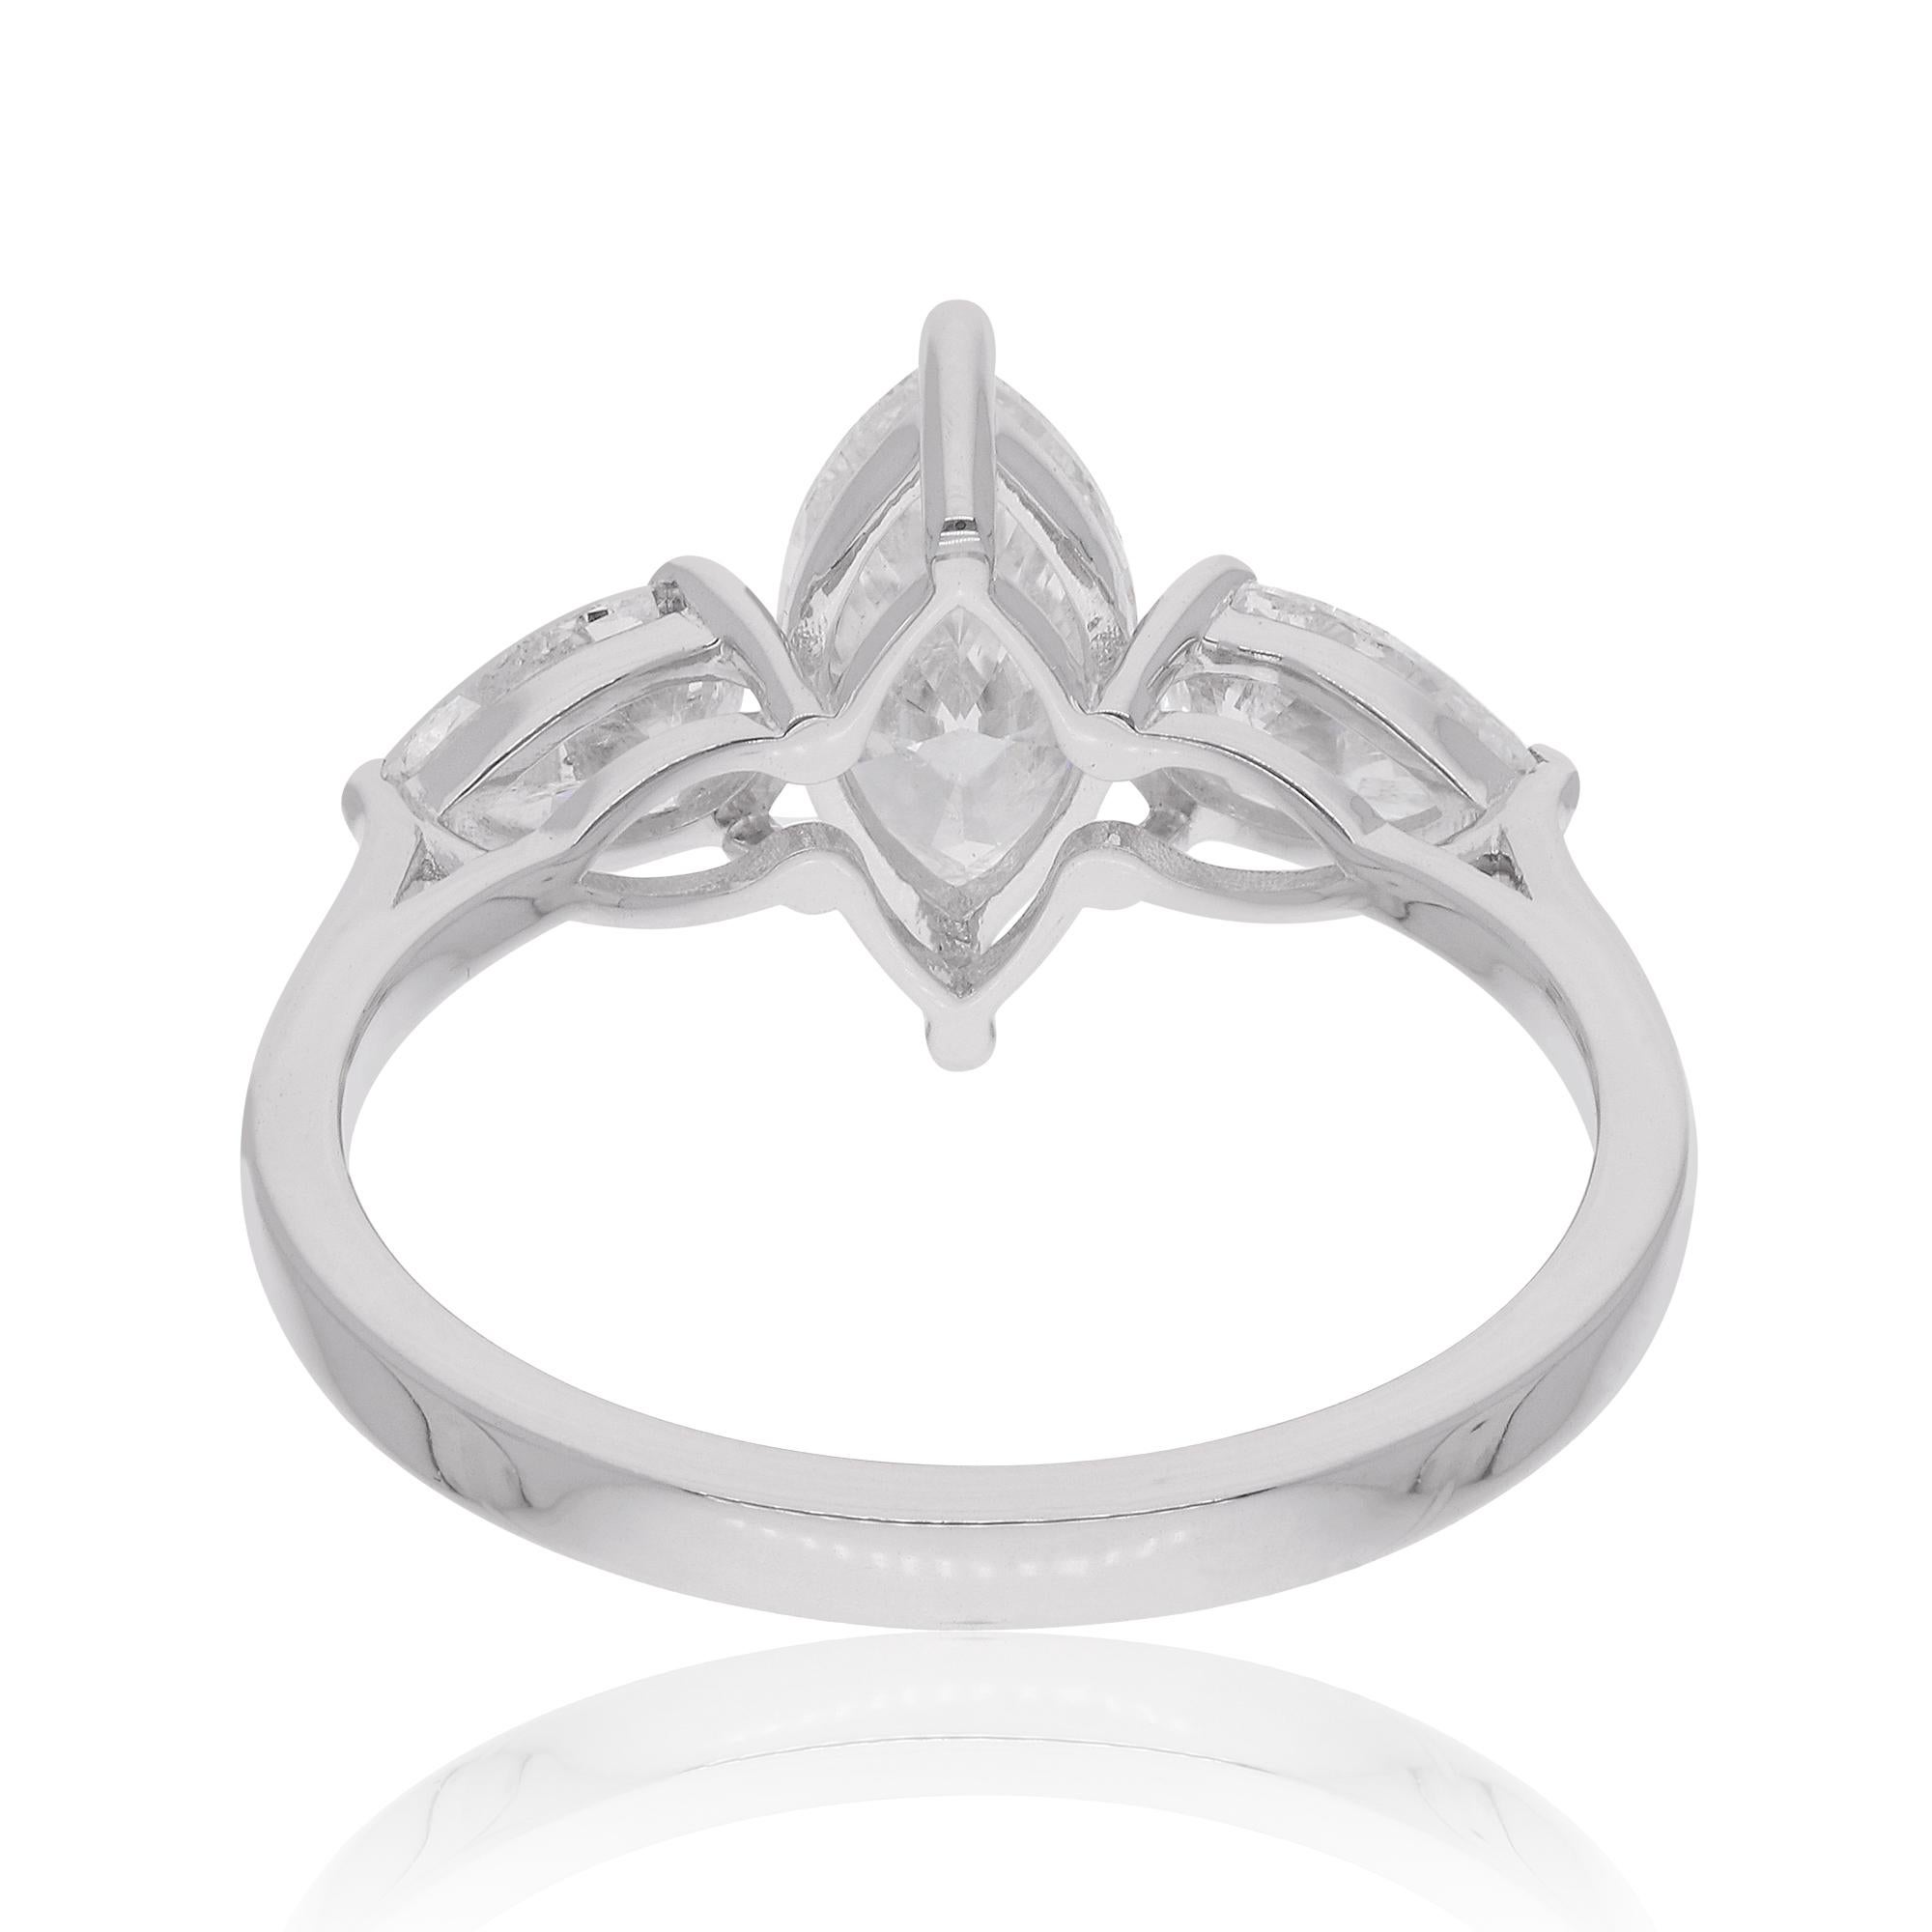 The ring can serve as a symbol of a promise or commitment, such as a promise of love, friendship, or loyalty. It can be given for various occasions, including engagements, anniversaries, or other significant milestones.

Item Code :- SER-23779
Gross